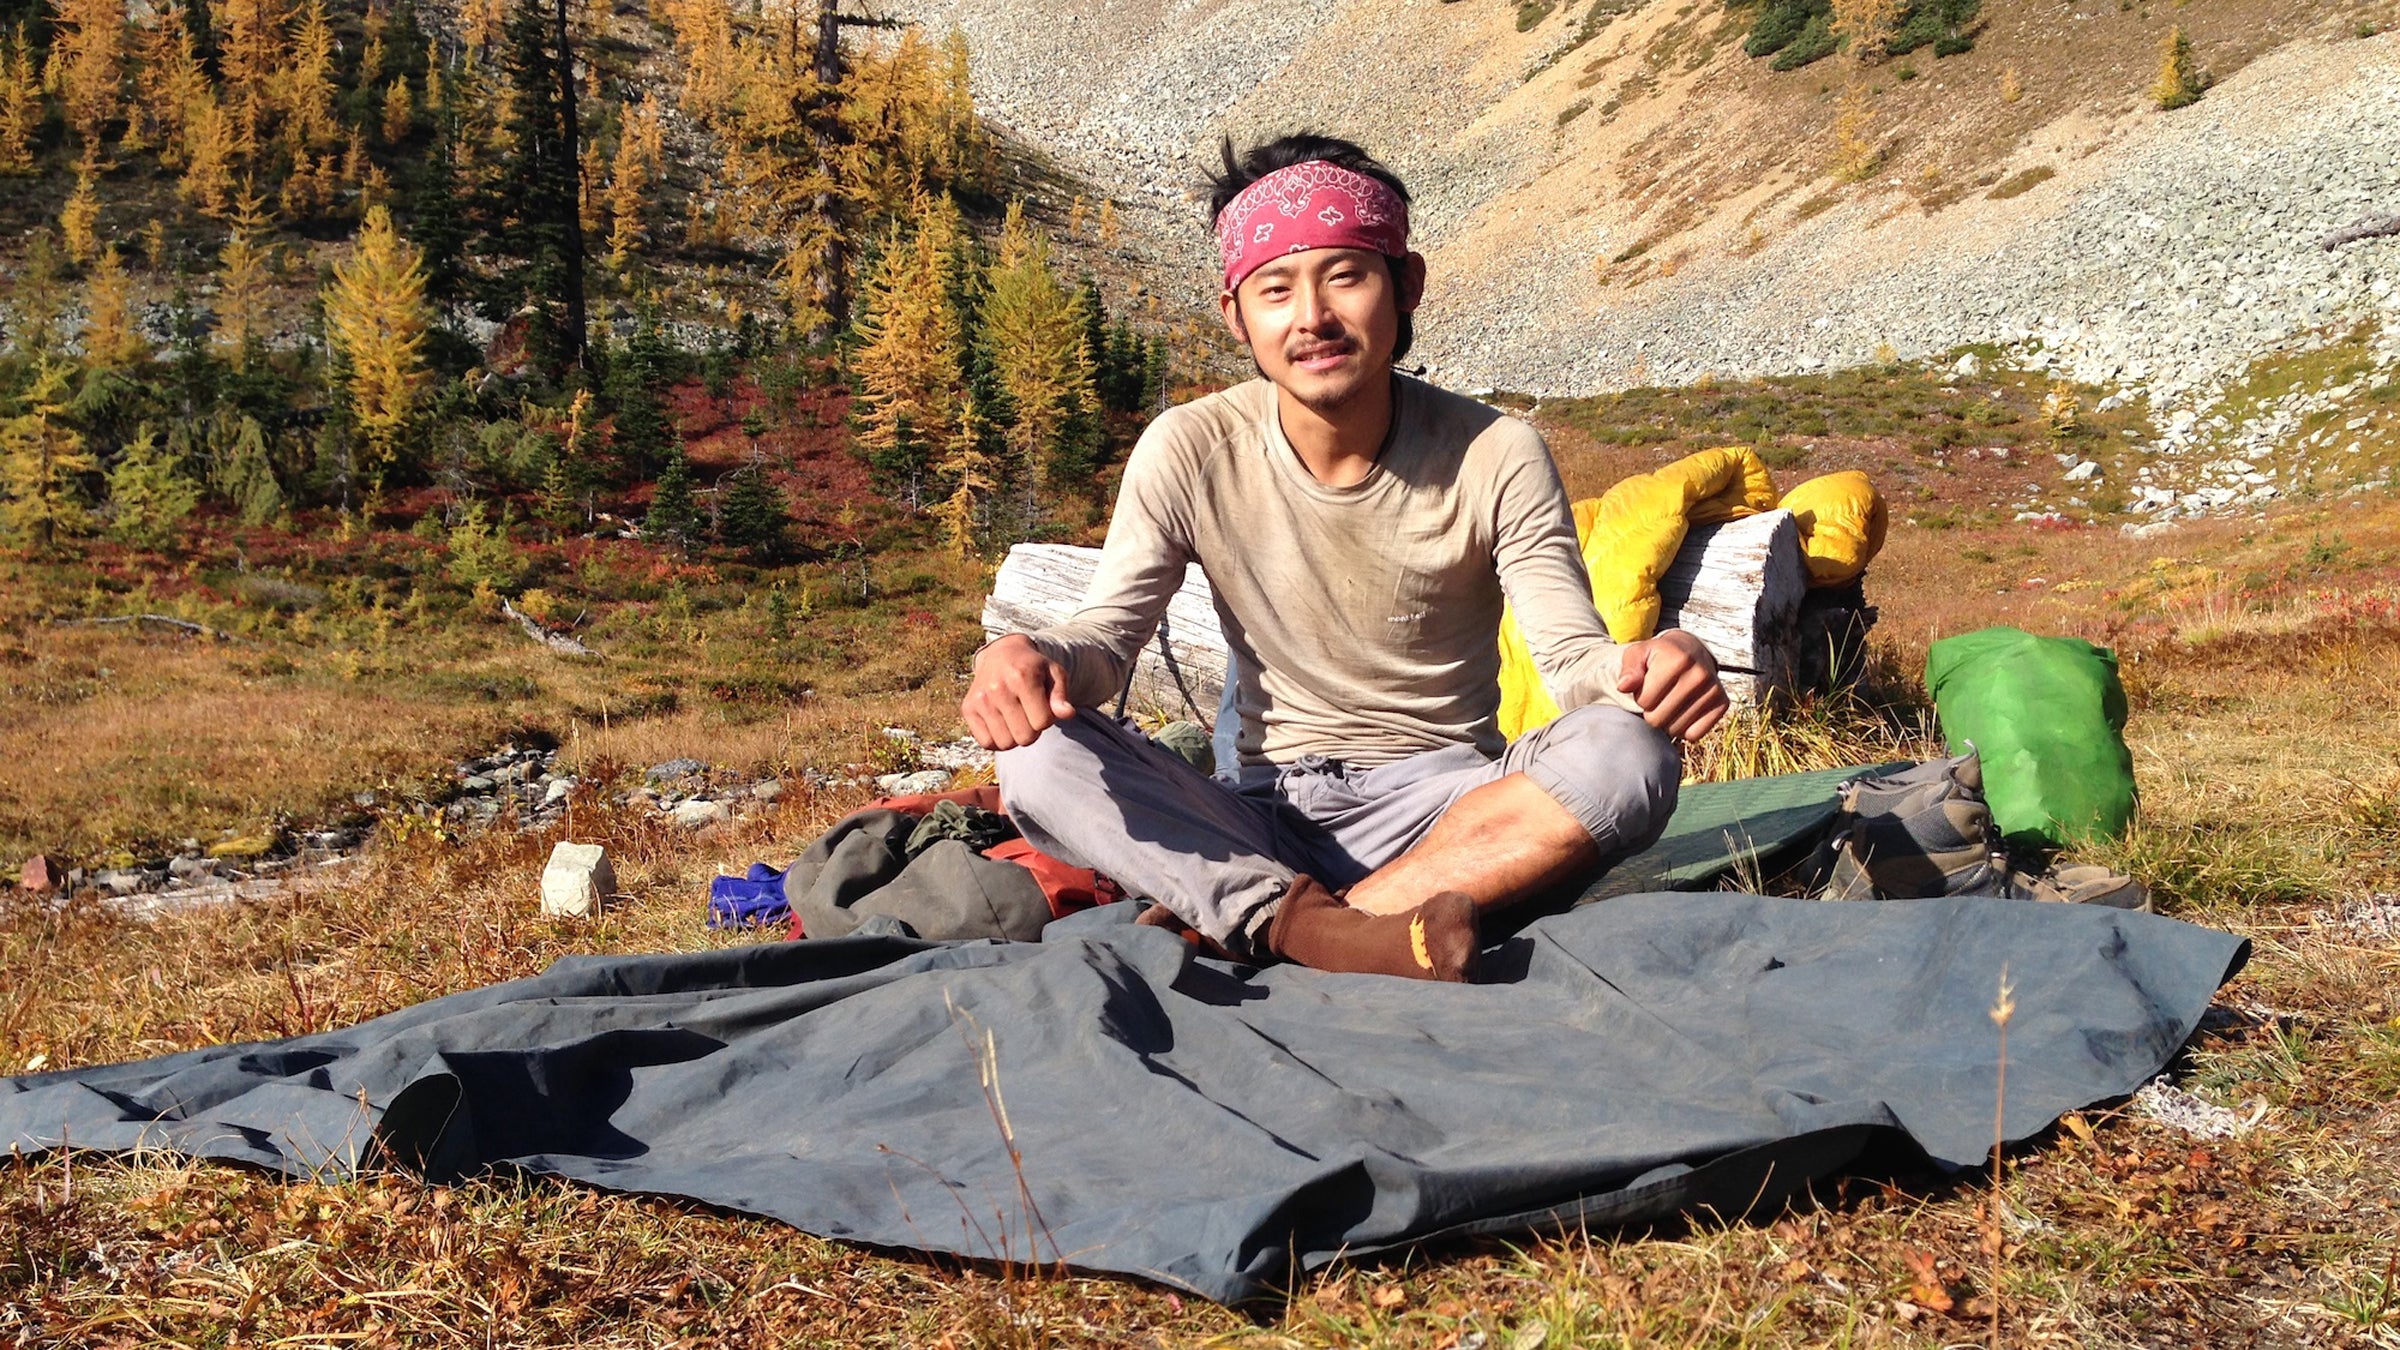 Kobayashi Shunsuke, 27
Trail Name: Koba
Tokyo, Japan
“I quit my job to come here and my mind is so spread because of the nature. I know American culture, having spoken to so many people. My mind is spread.”